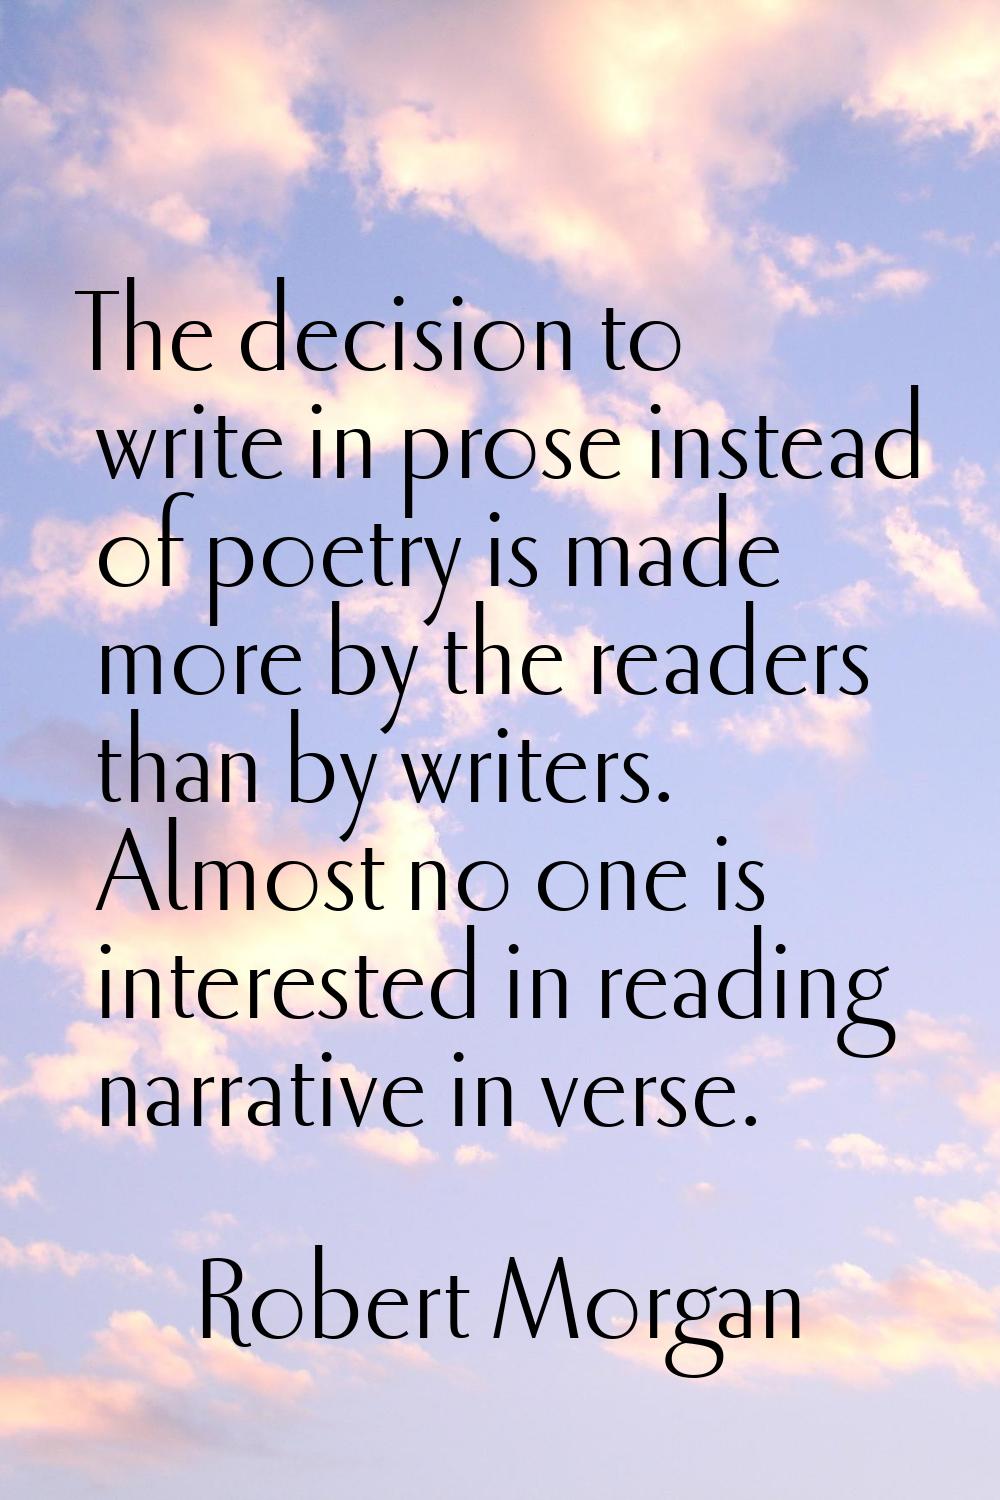 The decision to write in prose instead of poetry is made more by the readers than by writers. Almos